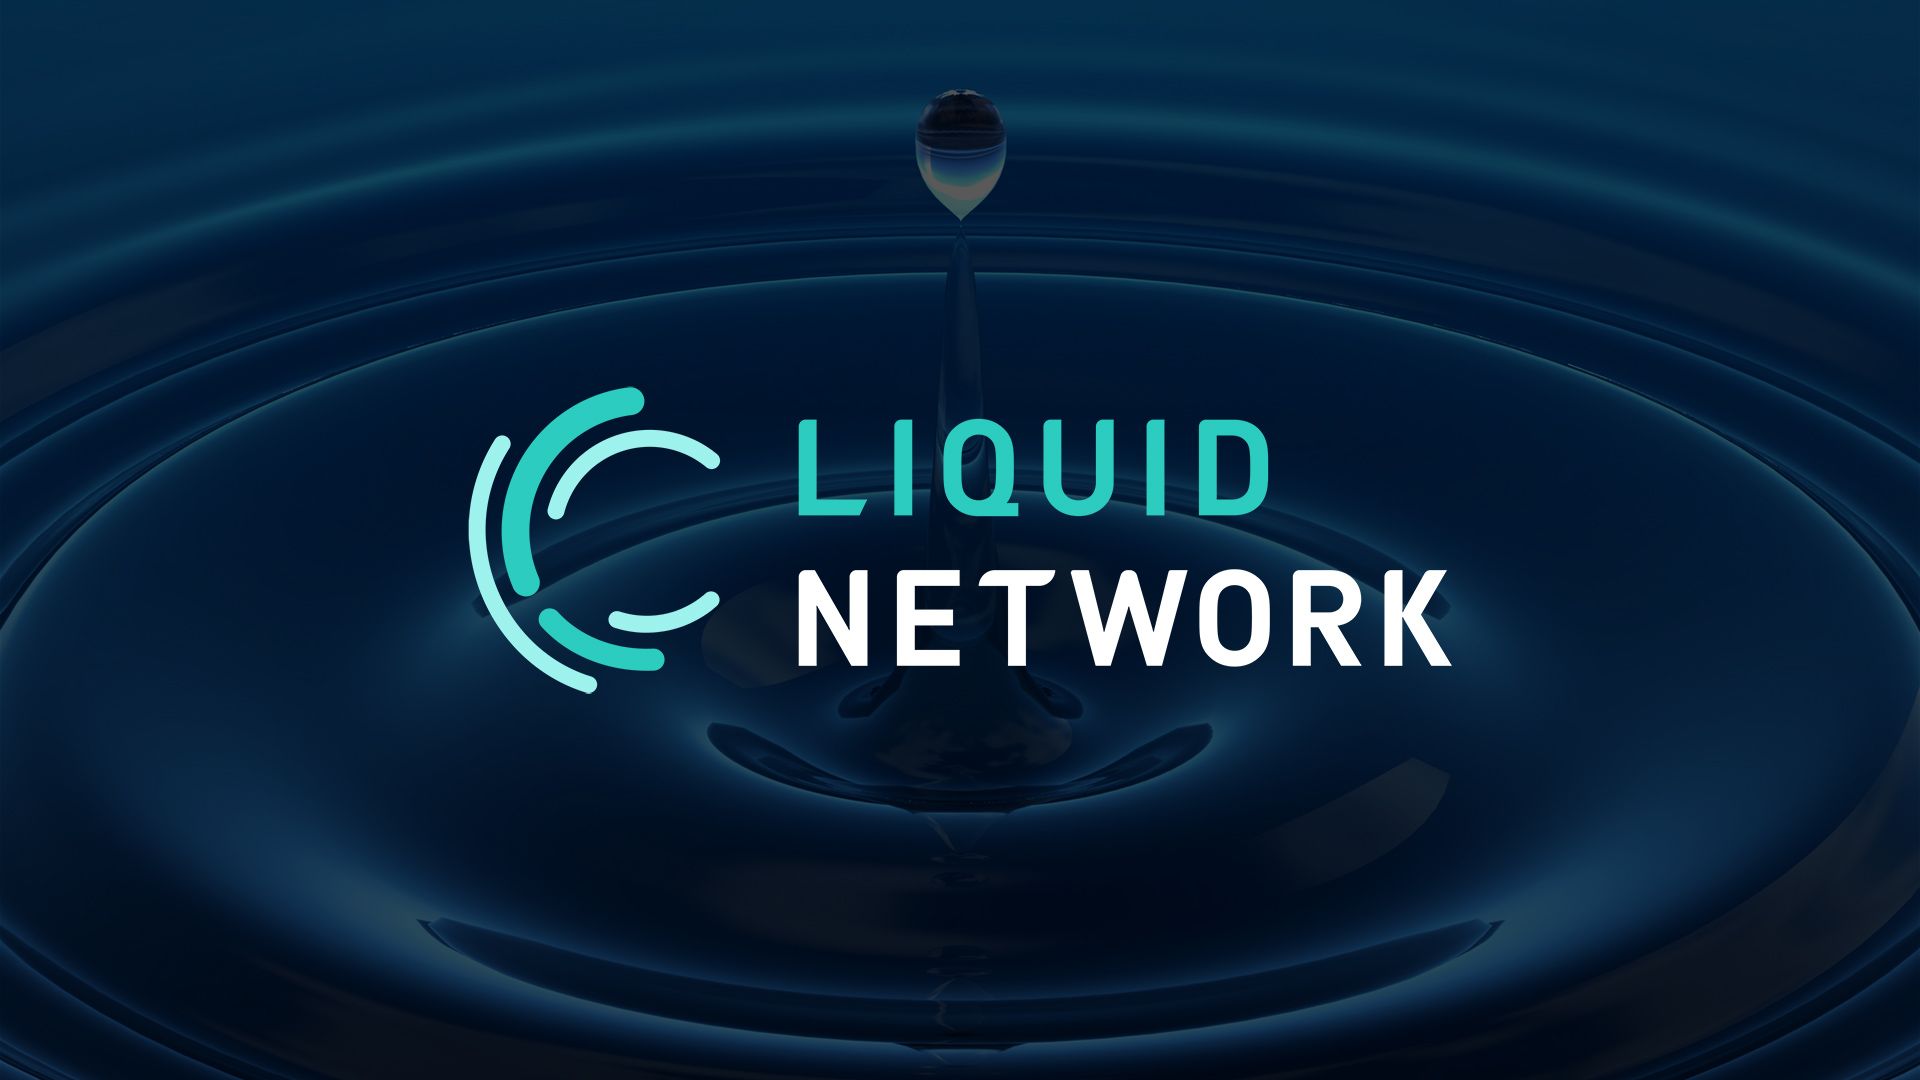 Liquid Network logo placed in the middle of darkened blue water background